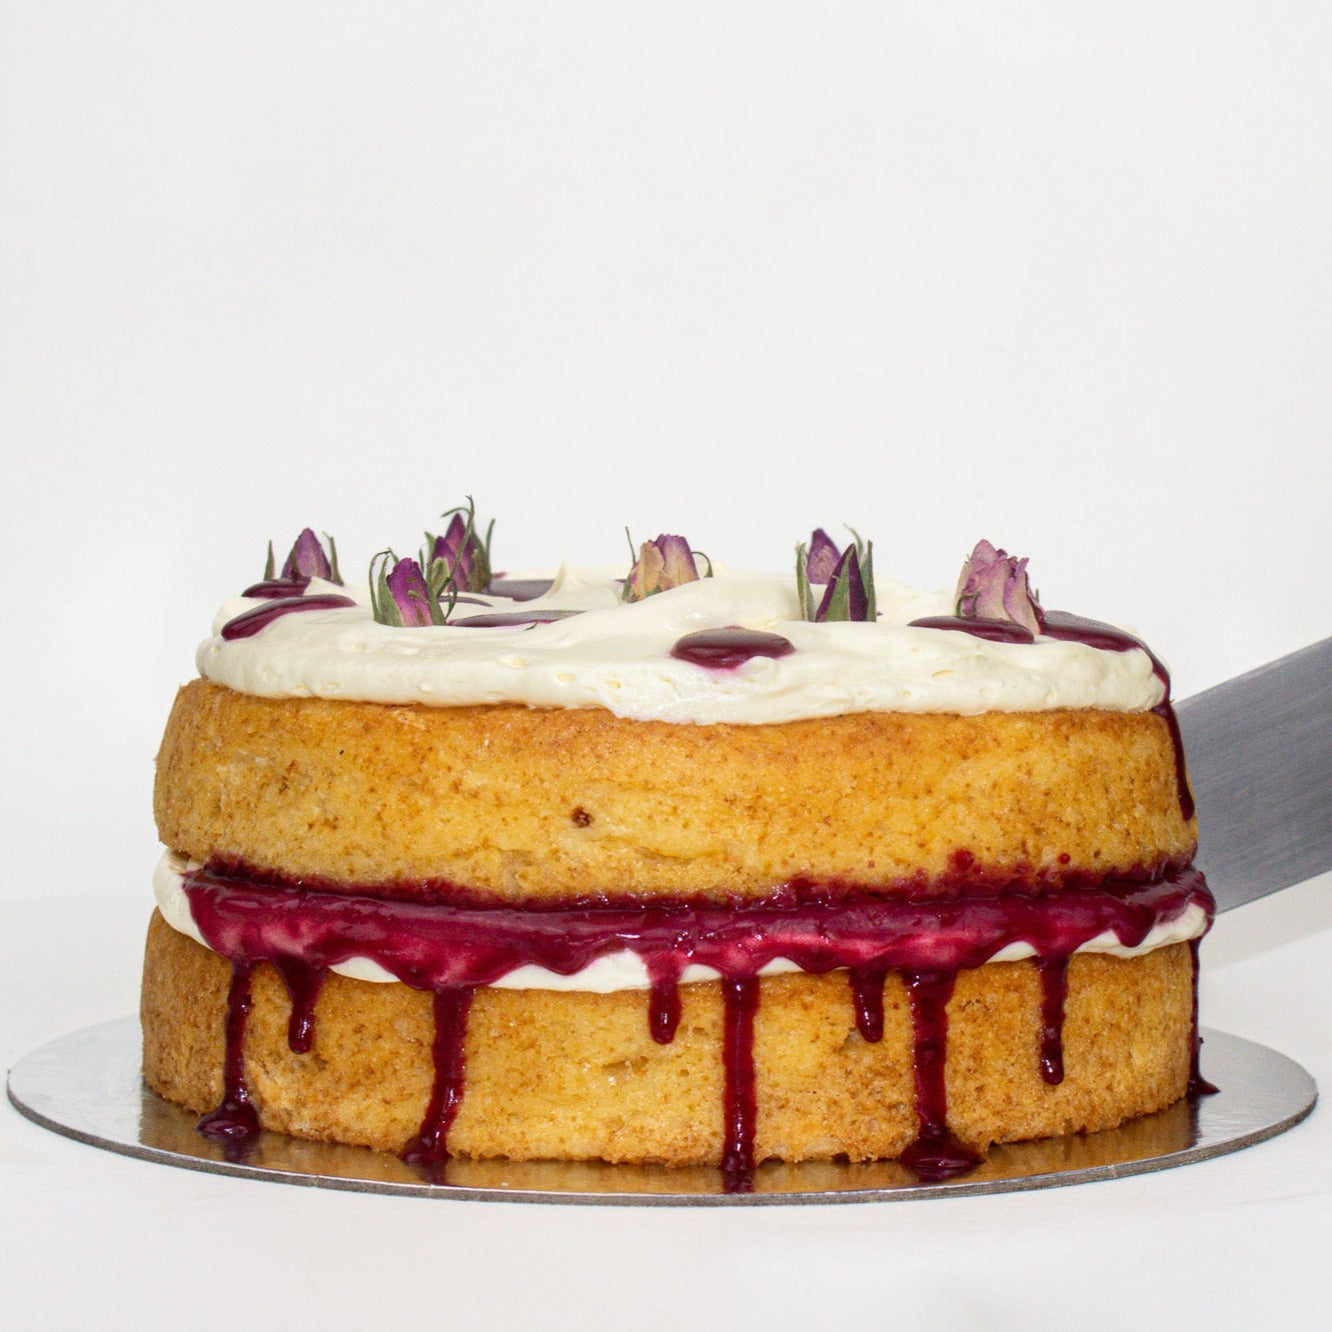 image of the raspberry, rhubarb and cream cake being cut by a large silver knife